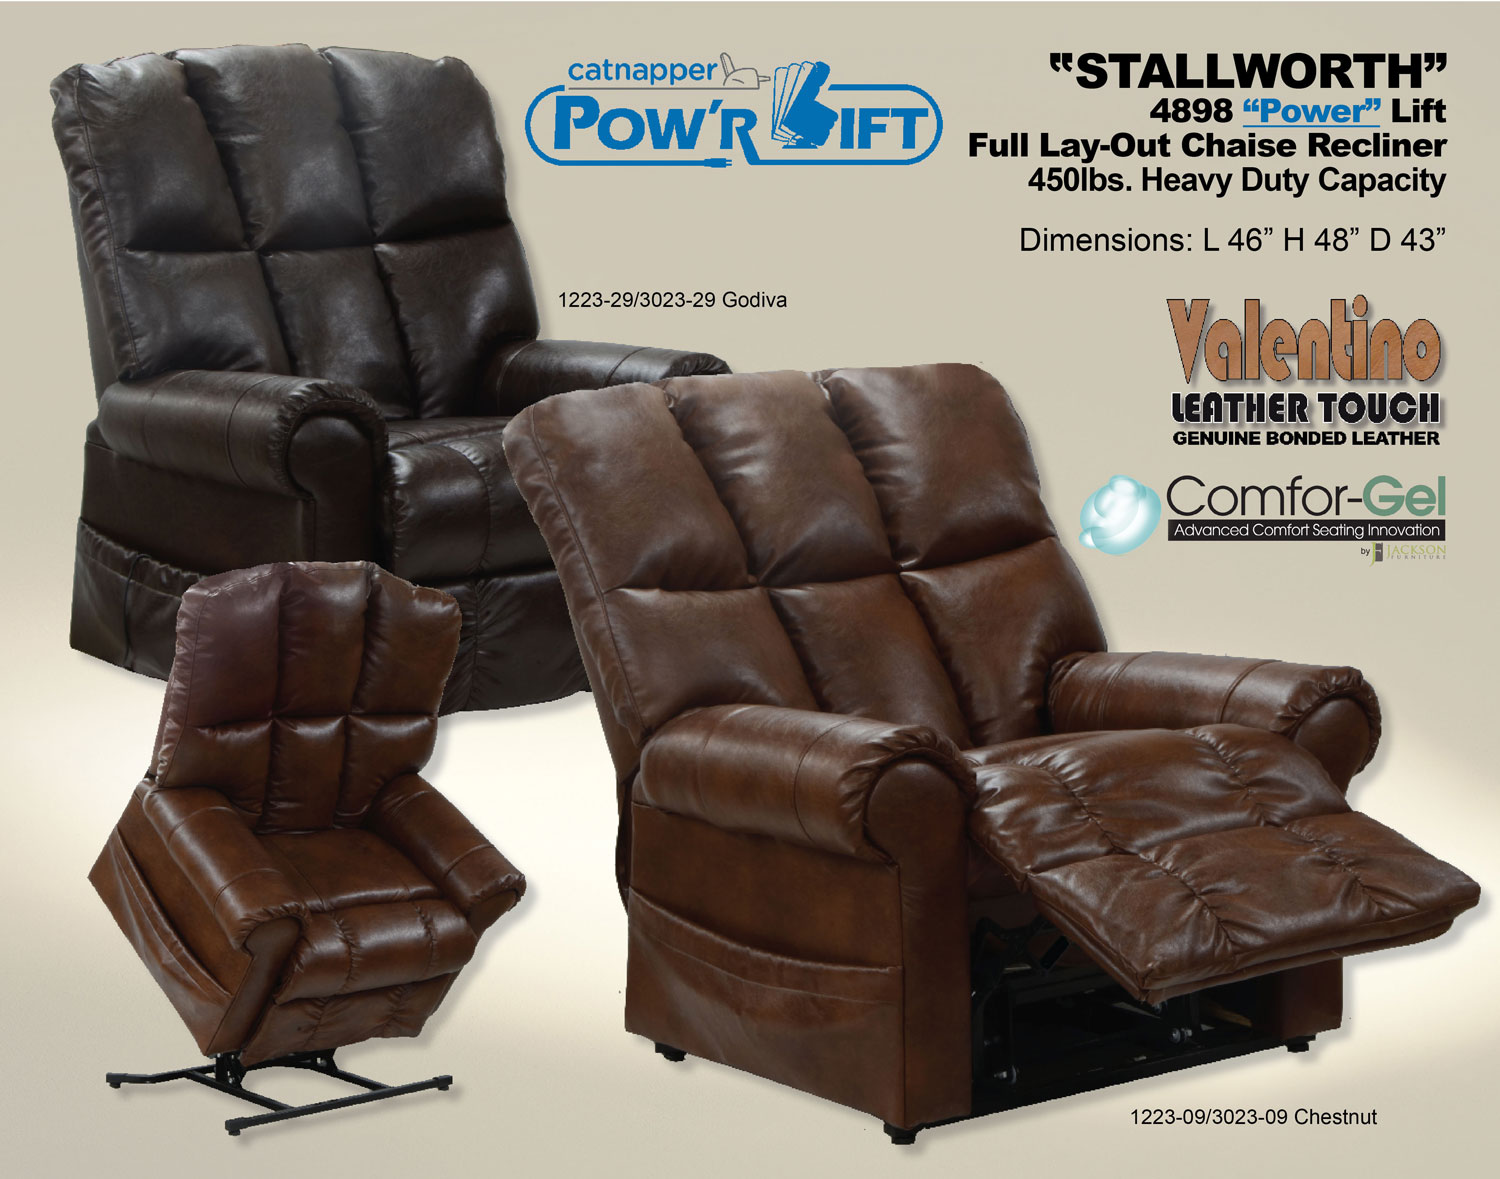 CatNapper Stallworth Bonded Leather Power Lift Full Lay Out Chaise Recliner - Chestnut